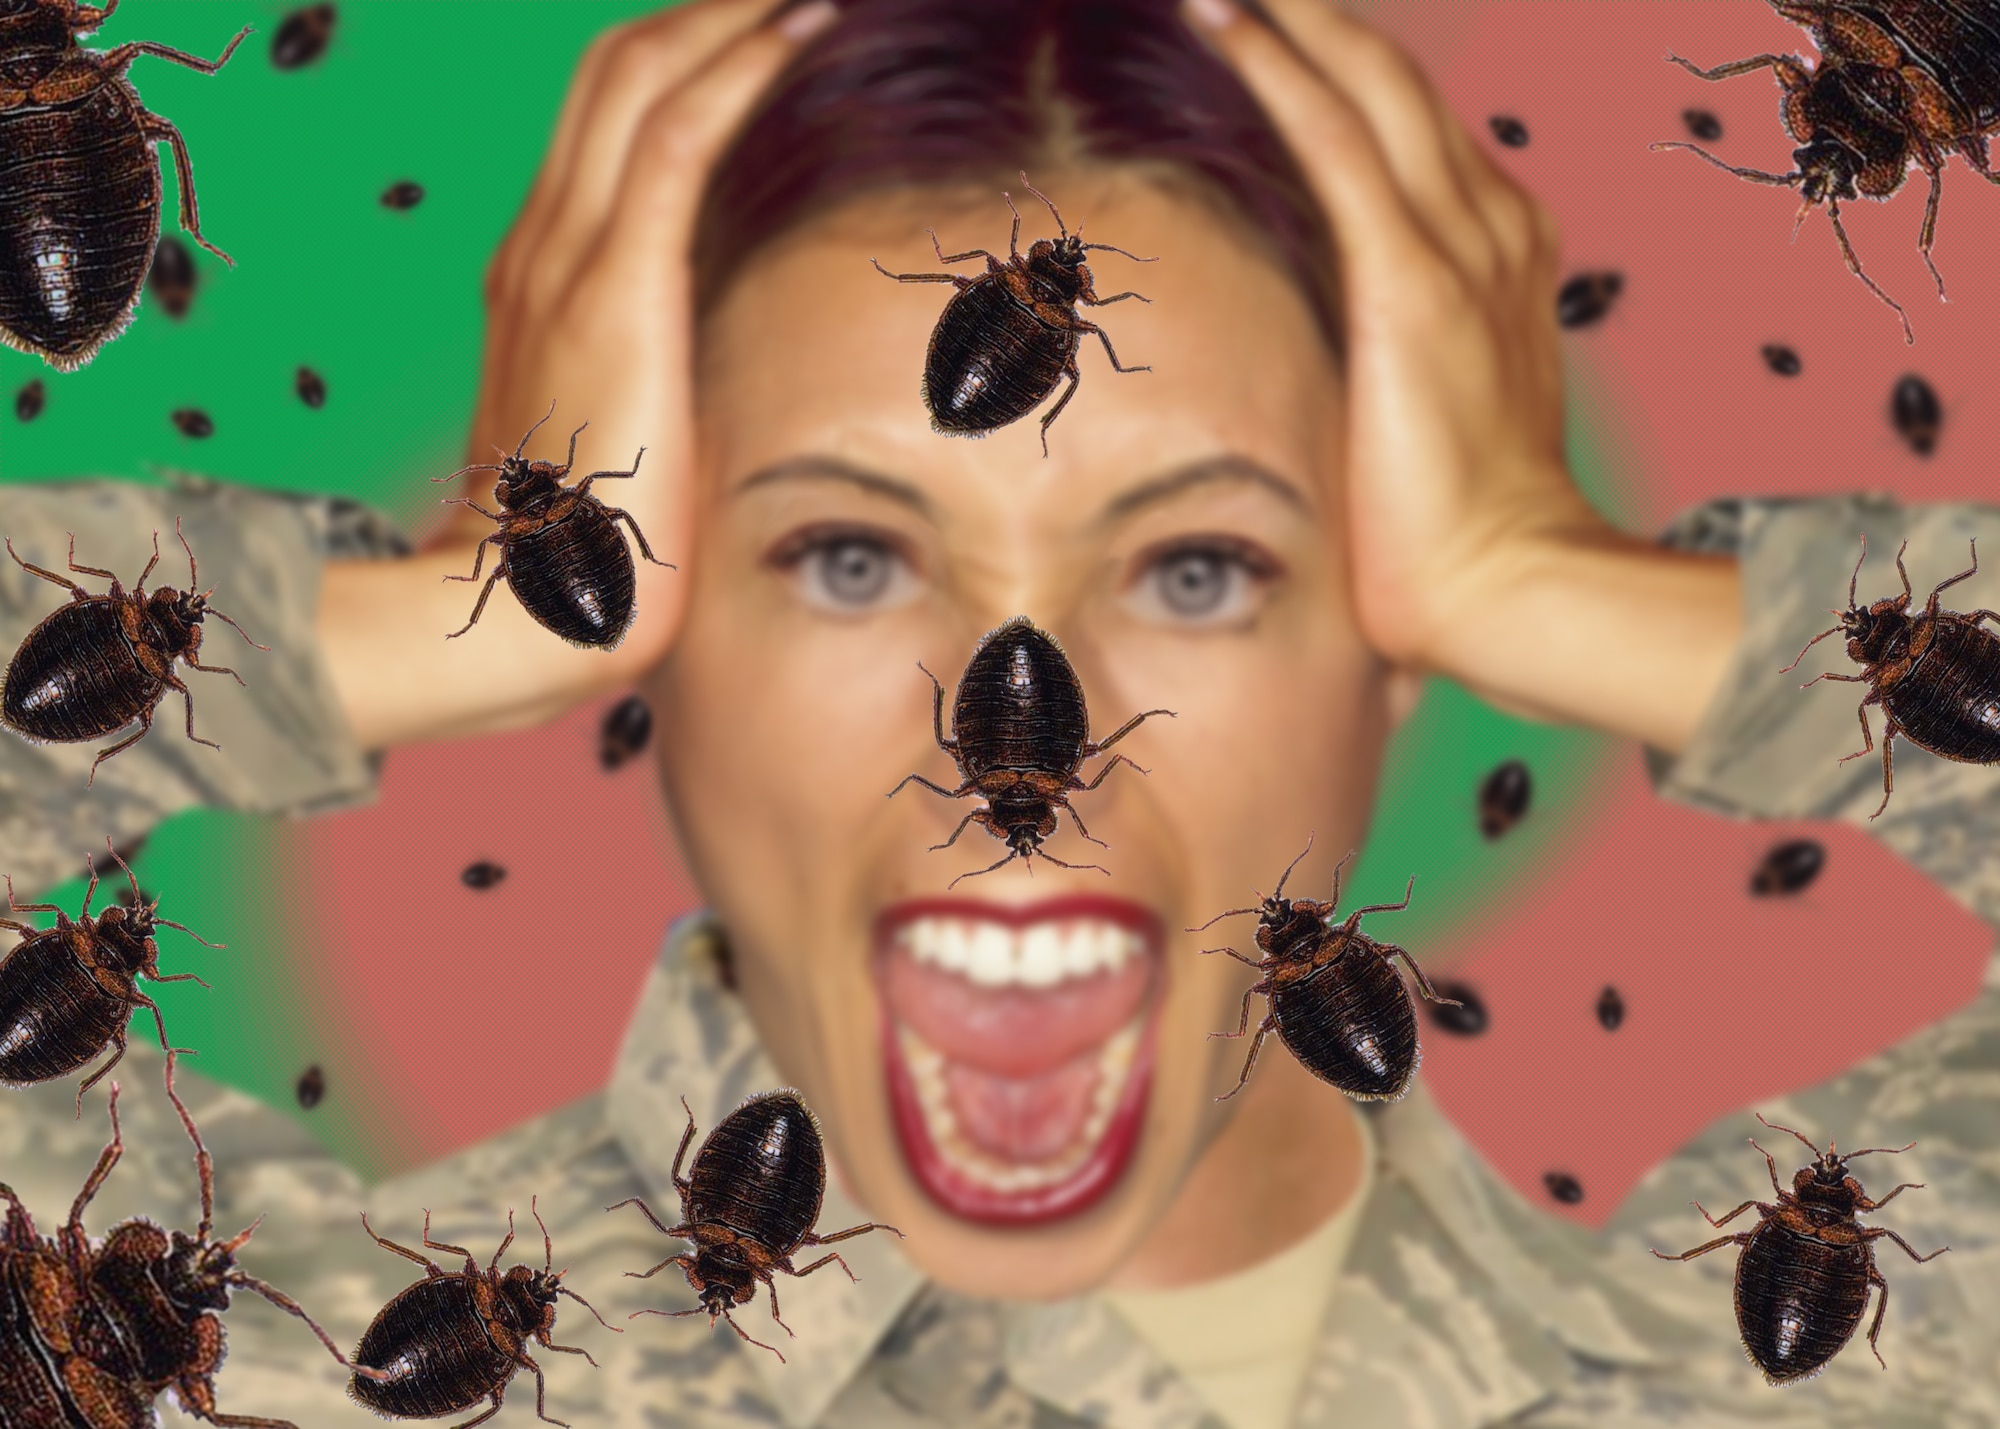 Bed bugs have upgraded their living quarters to upscale hotels, homes and military installations. This especially affects military members who travel and often stay in hotels or extended stays in military lodging.(U.S. Air Force graphic by Staff Sgt. Joseph McKee)